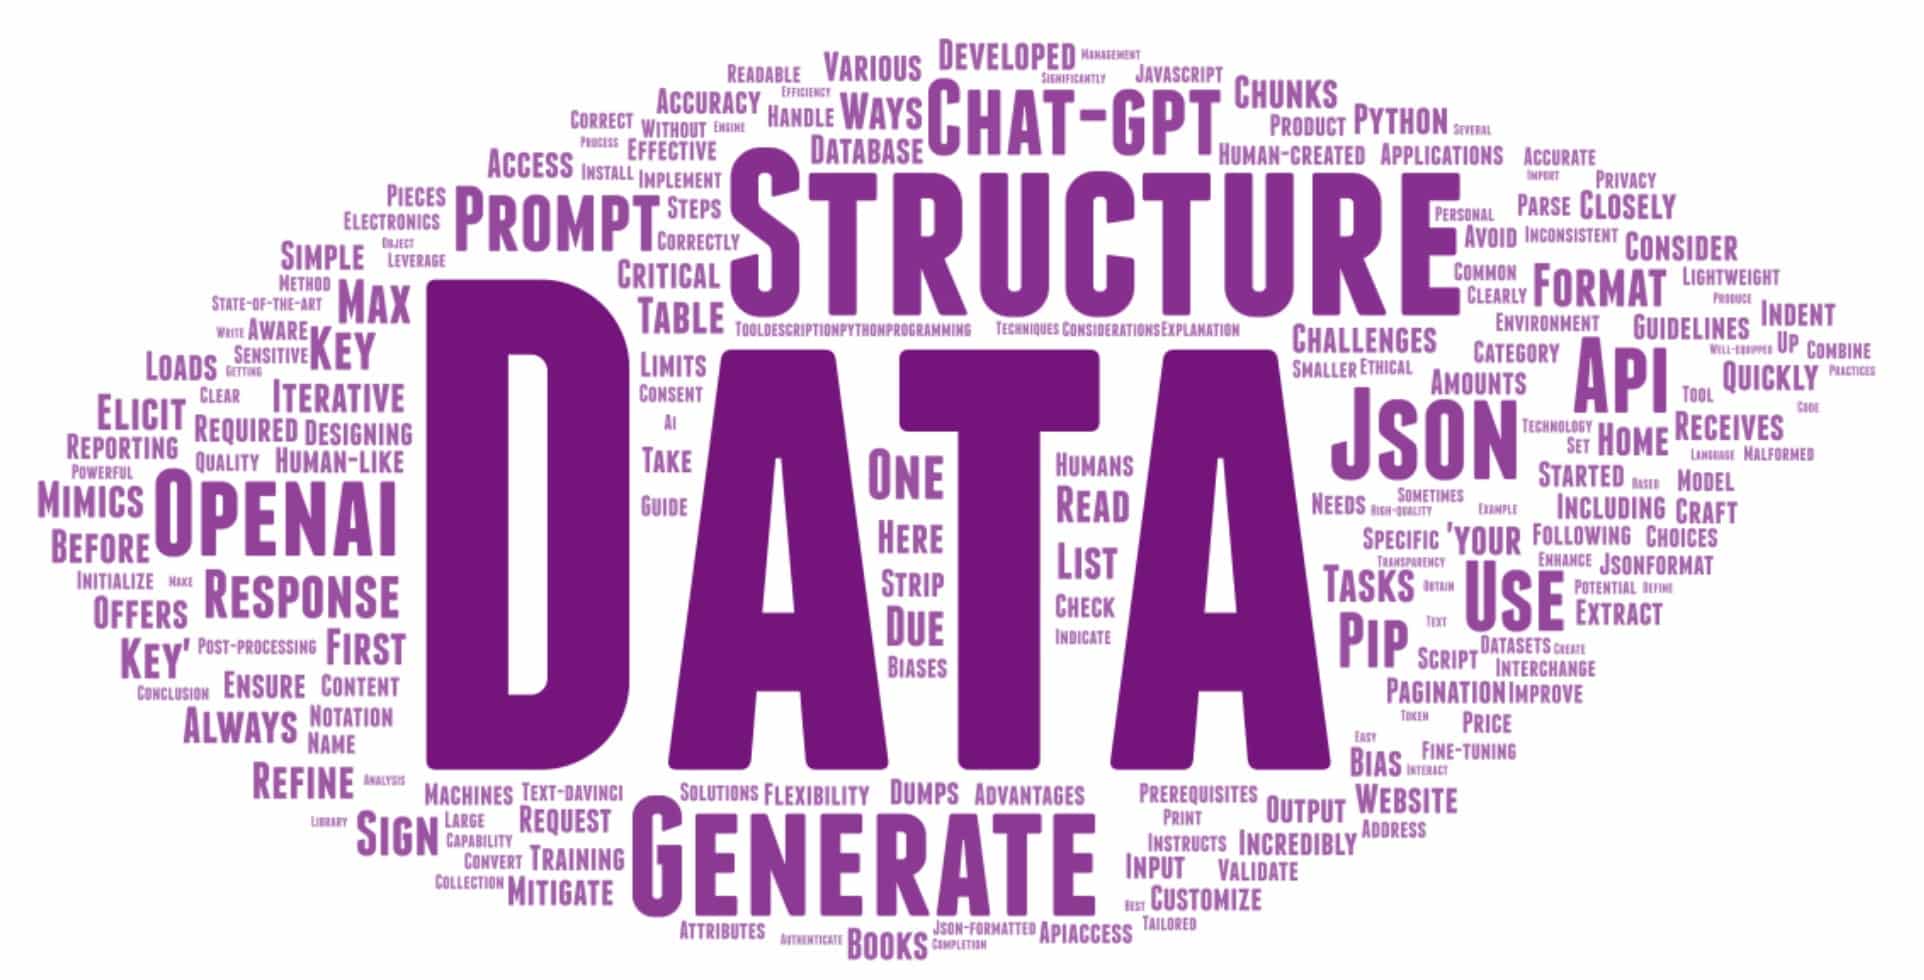 How to Get Structured Data from Chat-GPT?